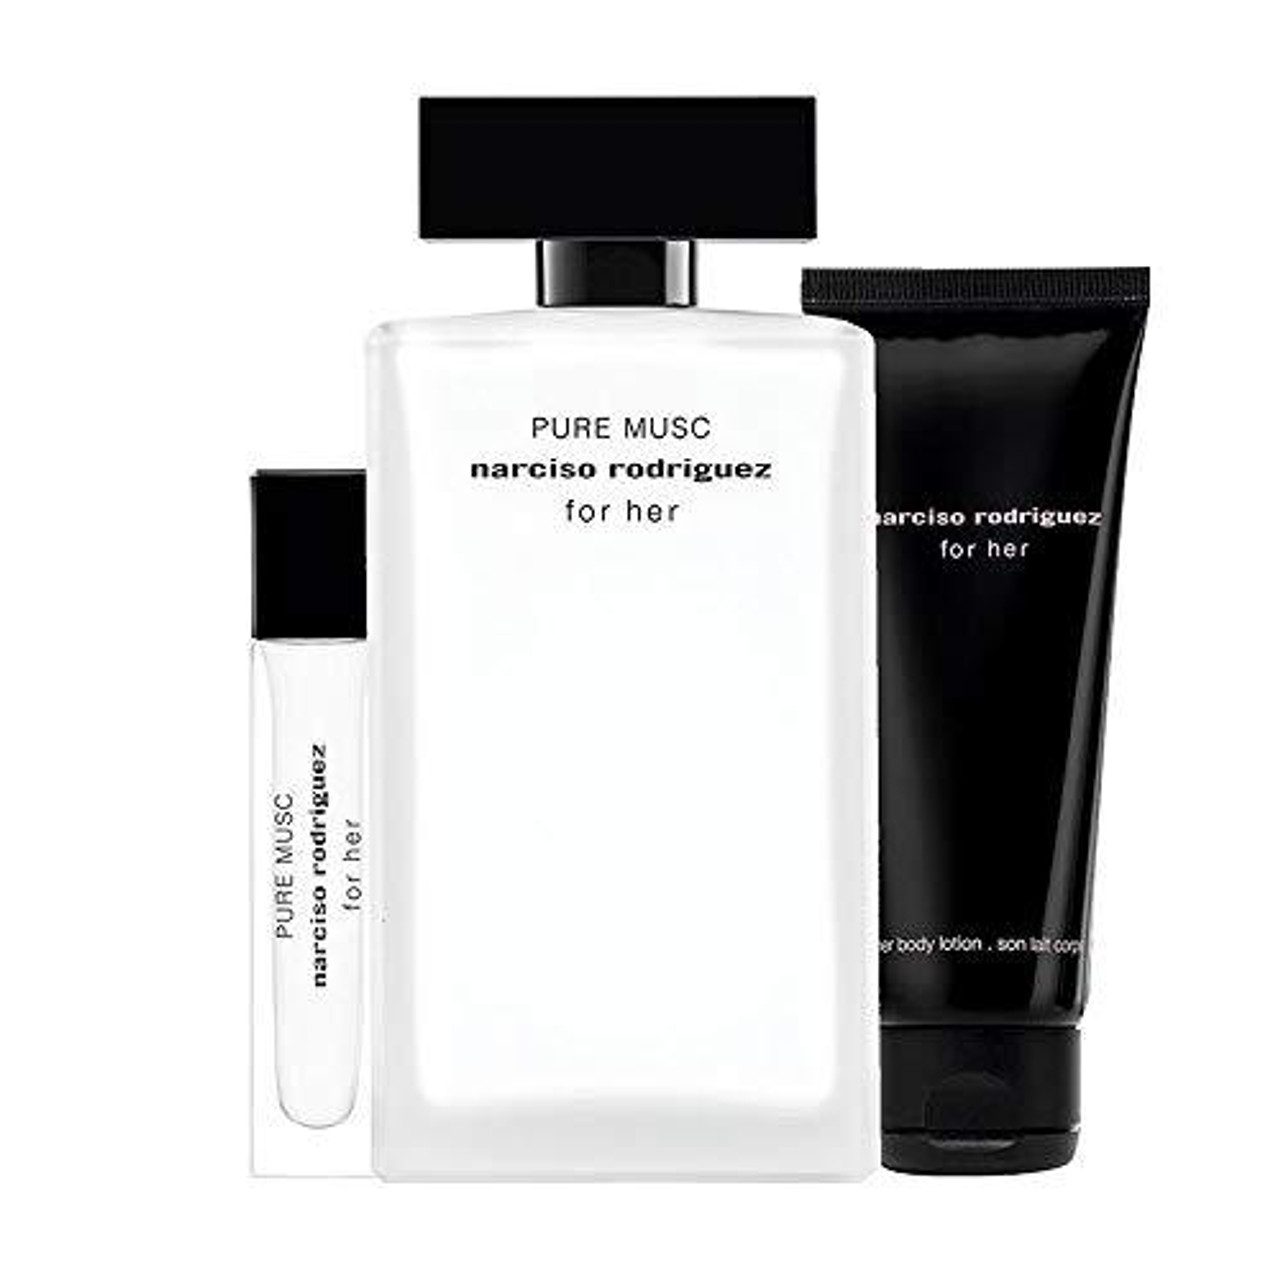 NARCISO RODRIGUES FOR HER PURE MUSC 3PCS Gift SET - 3.4OZ EDP + 0.33OZ EDP  + 1.7OZ BODY LOTION